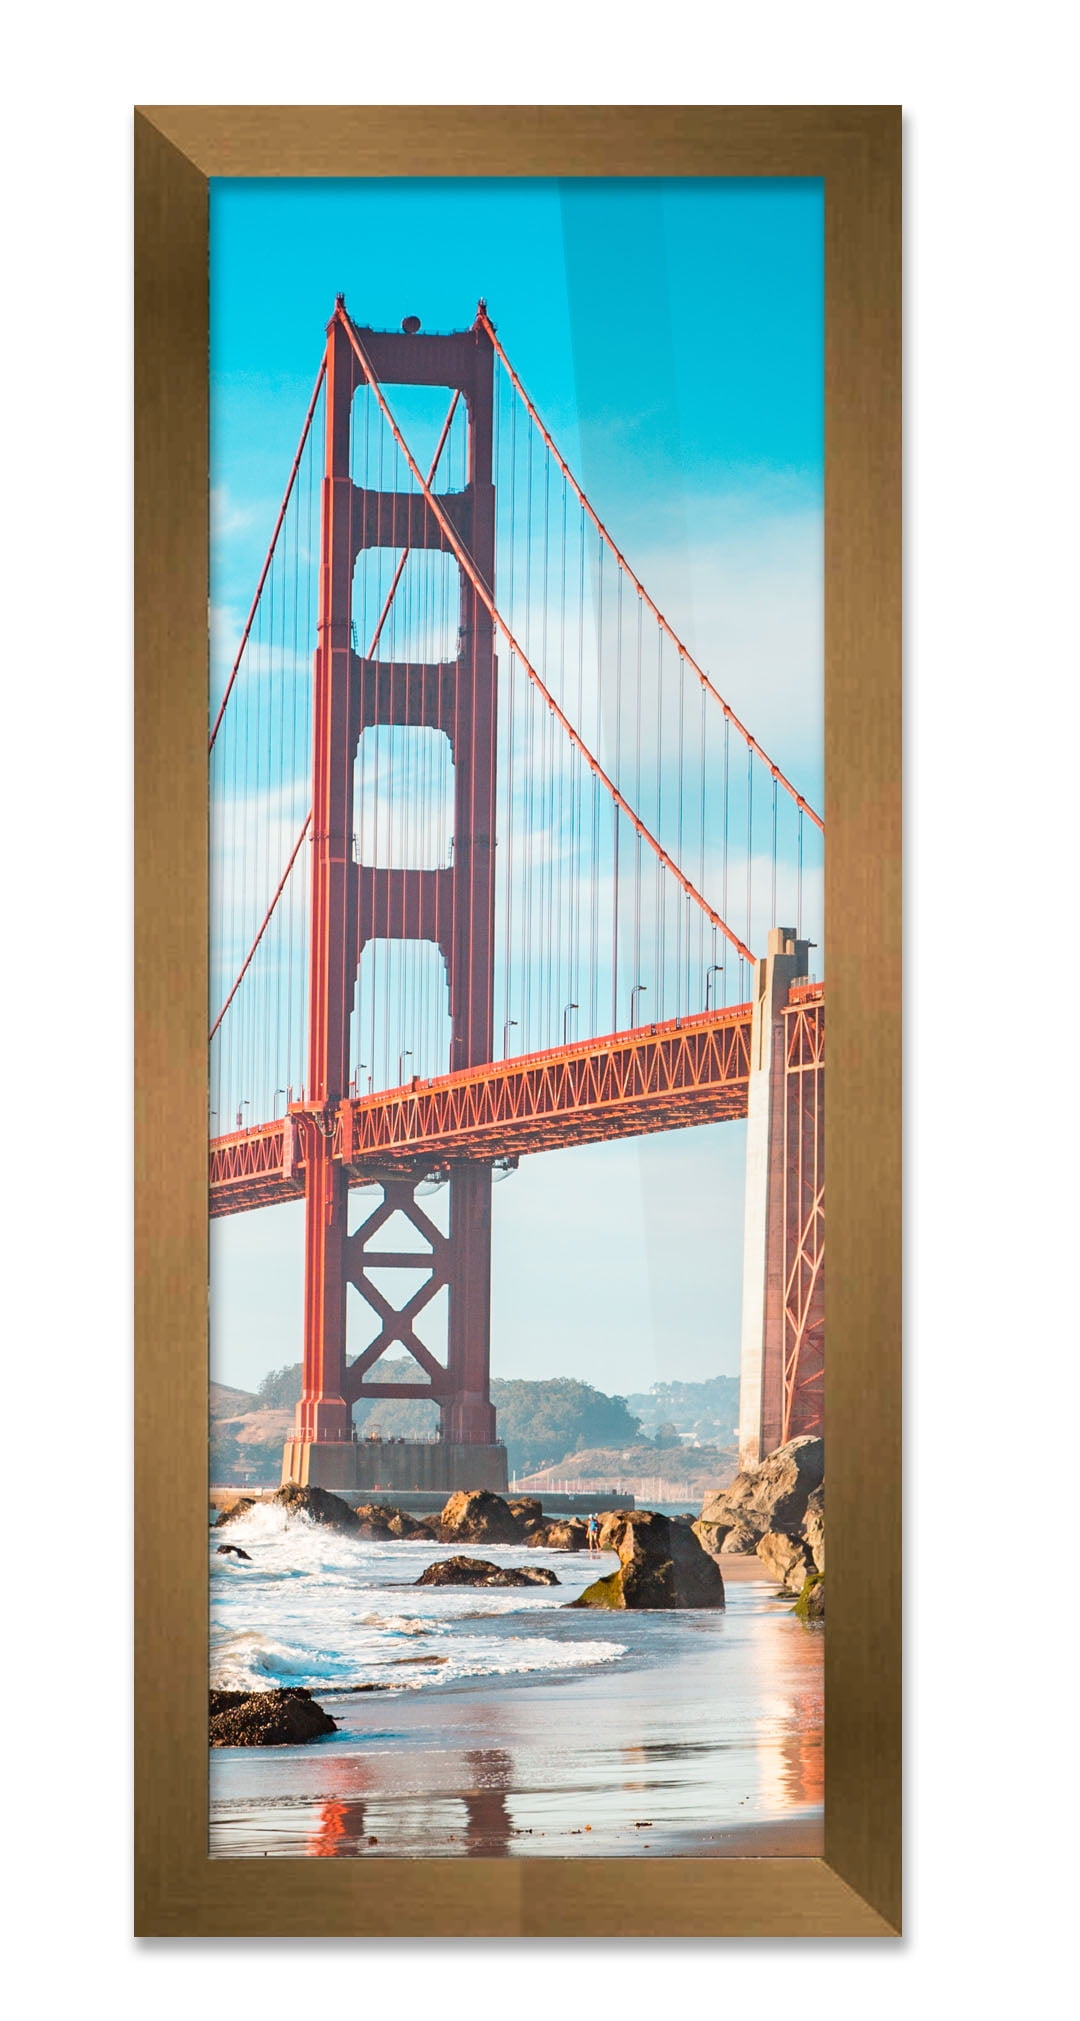 6x6 Frame Gold Bronze Picture Frame - Modern Photo Frame Includes UV  Acrylic Shatter Guard Front, Acid Free Foam Backing Board, Hanging Hardware  Wood